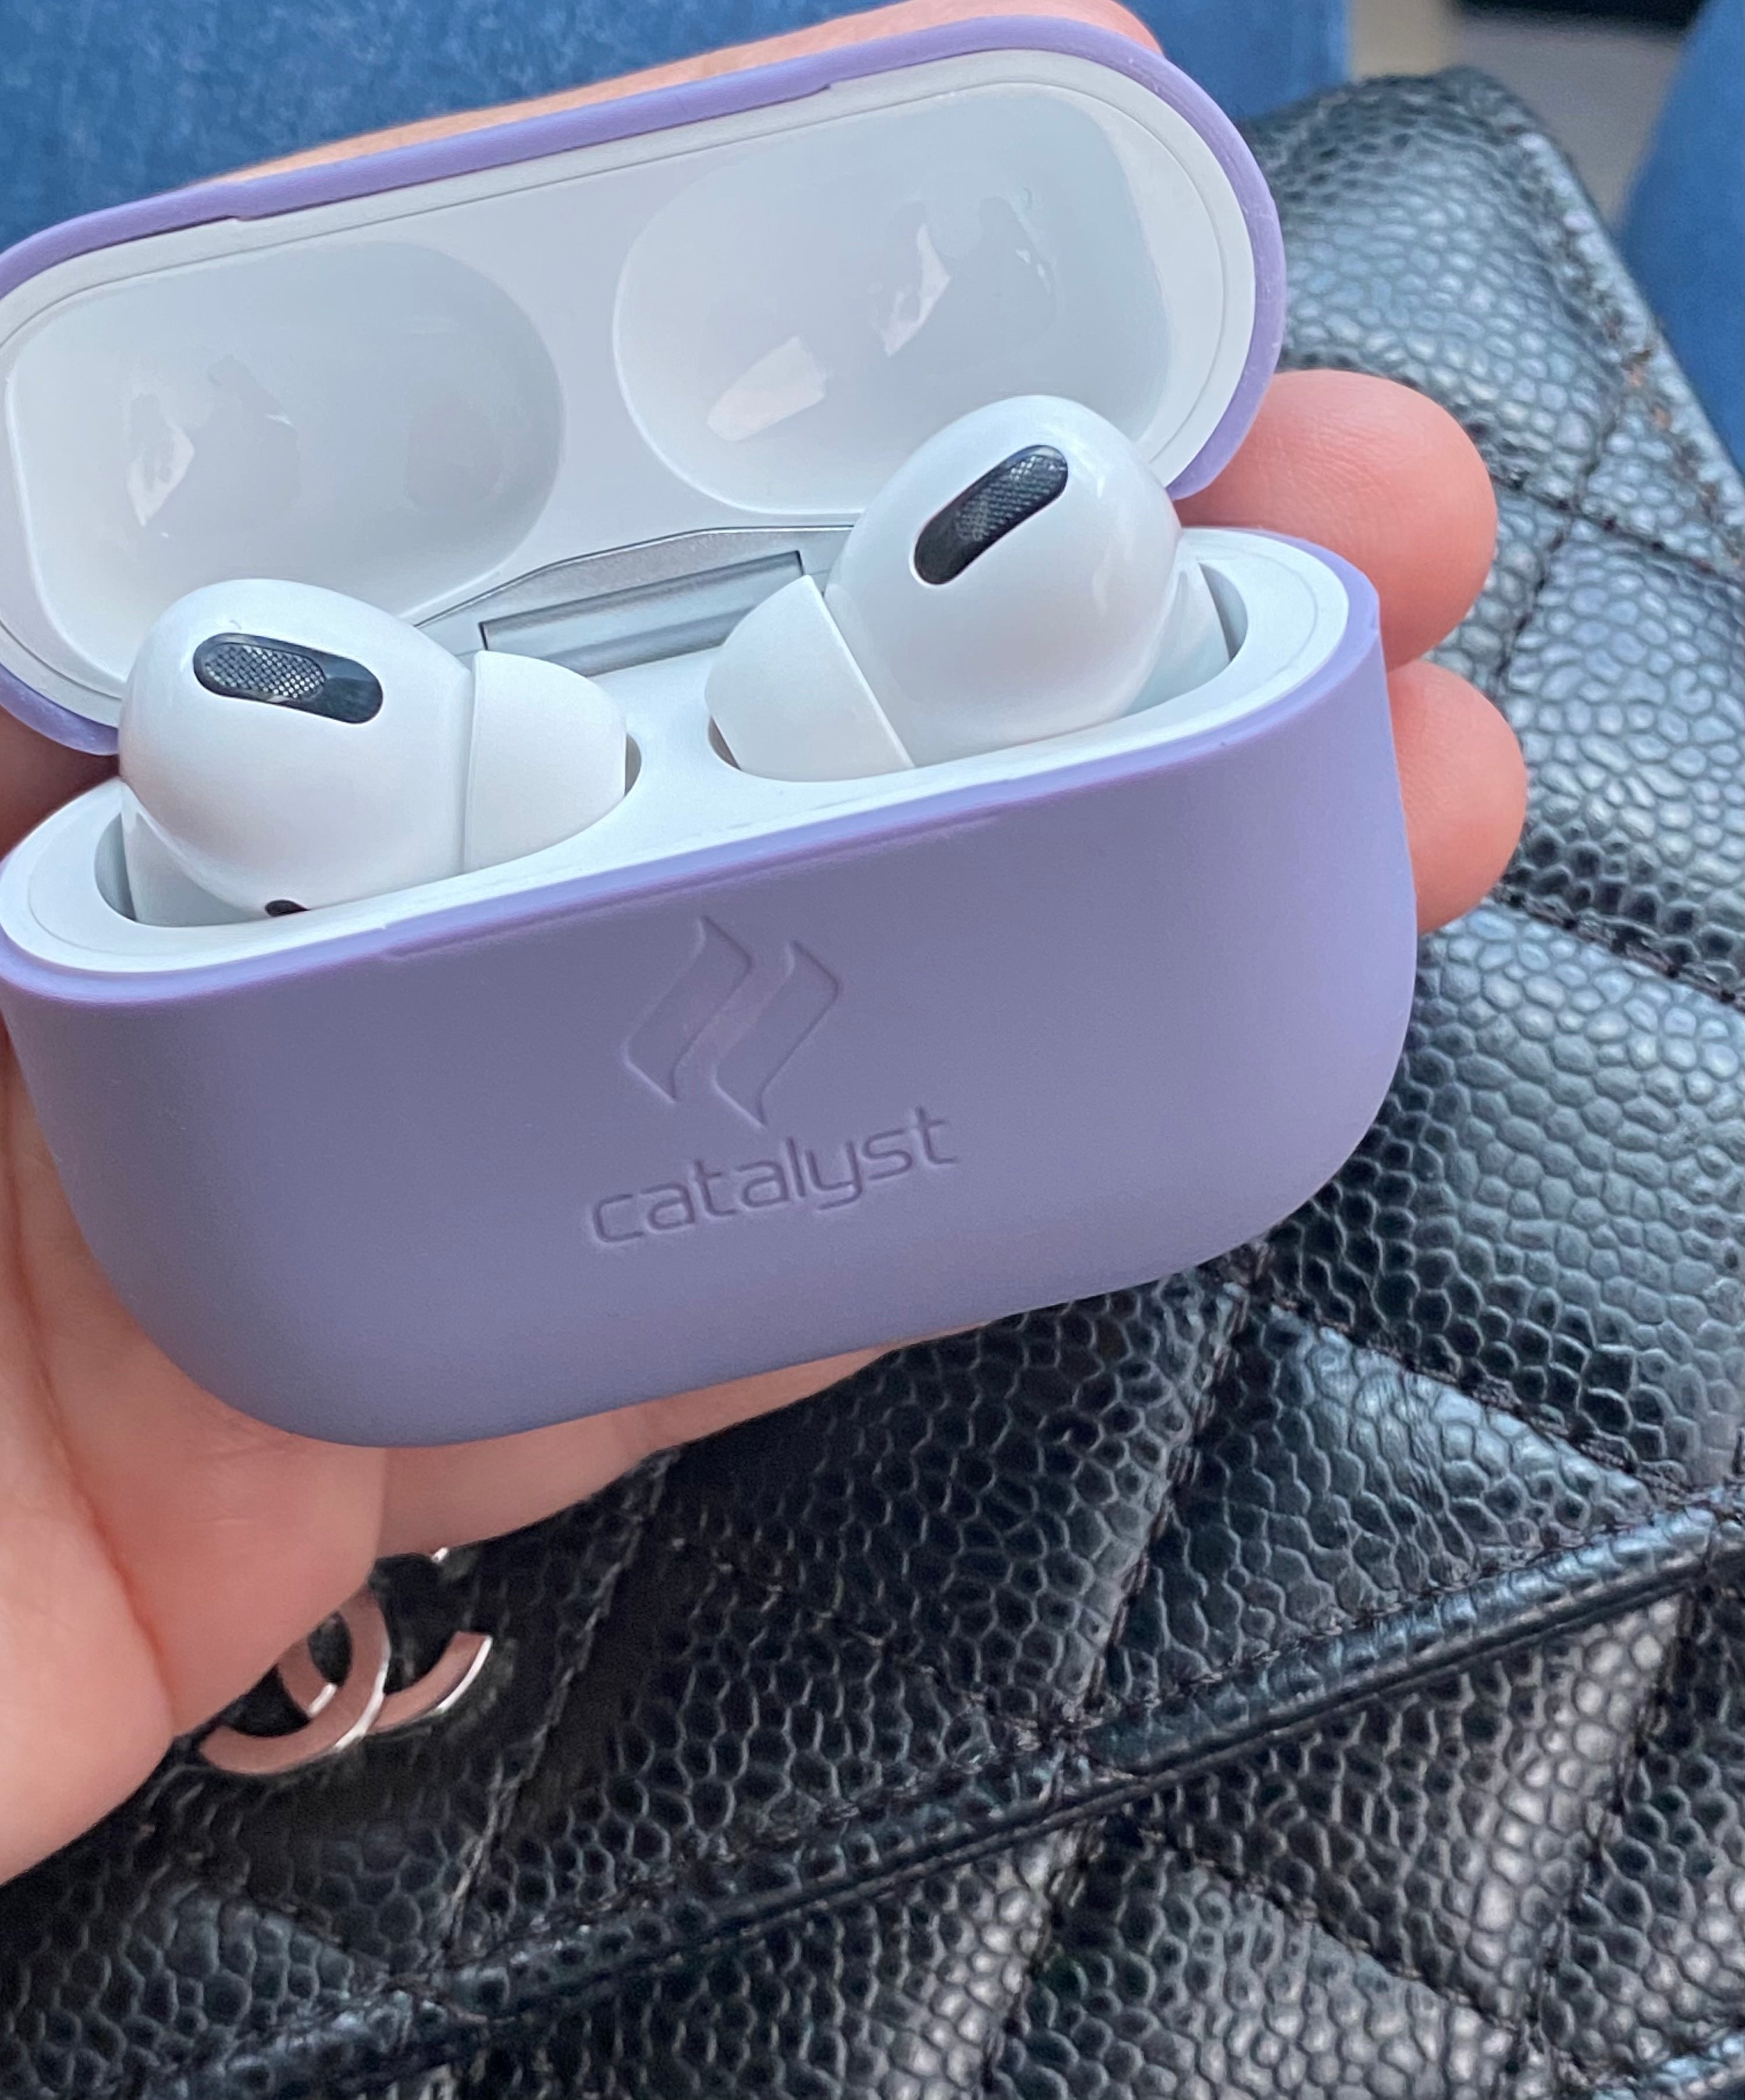 Catalyst airpods pro gen 2/1 slim case showing  airpods inside-the case in lilac colorway